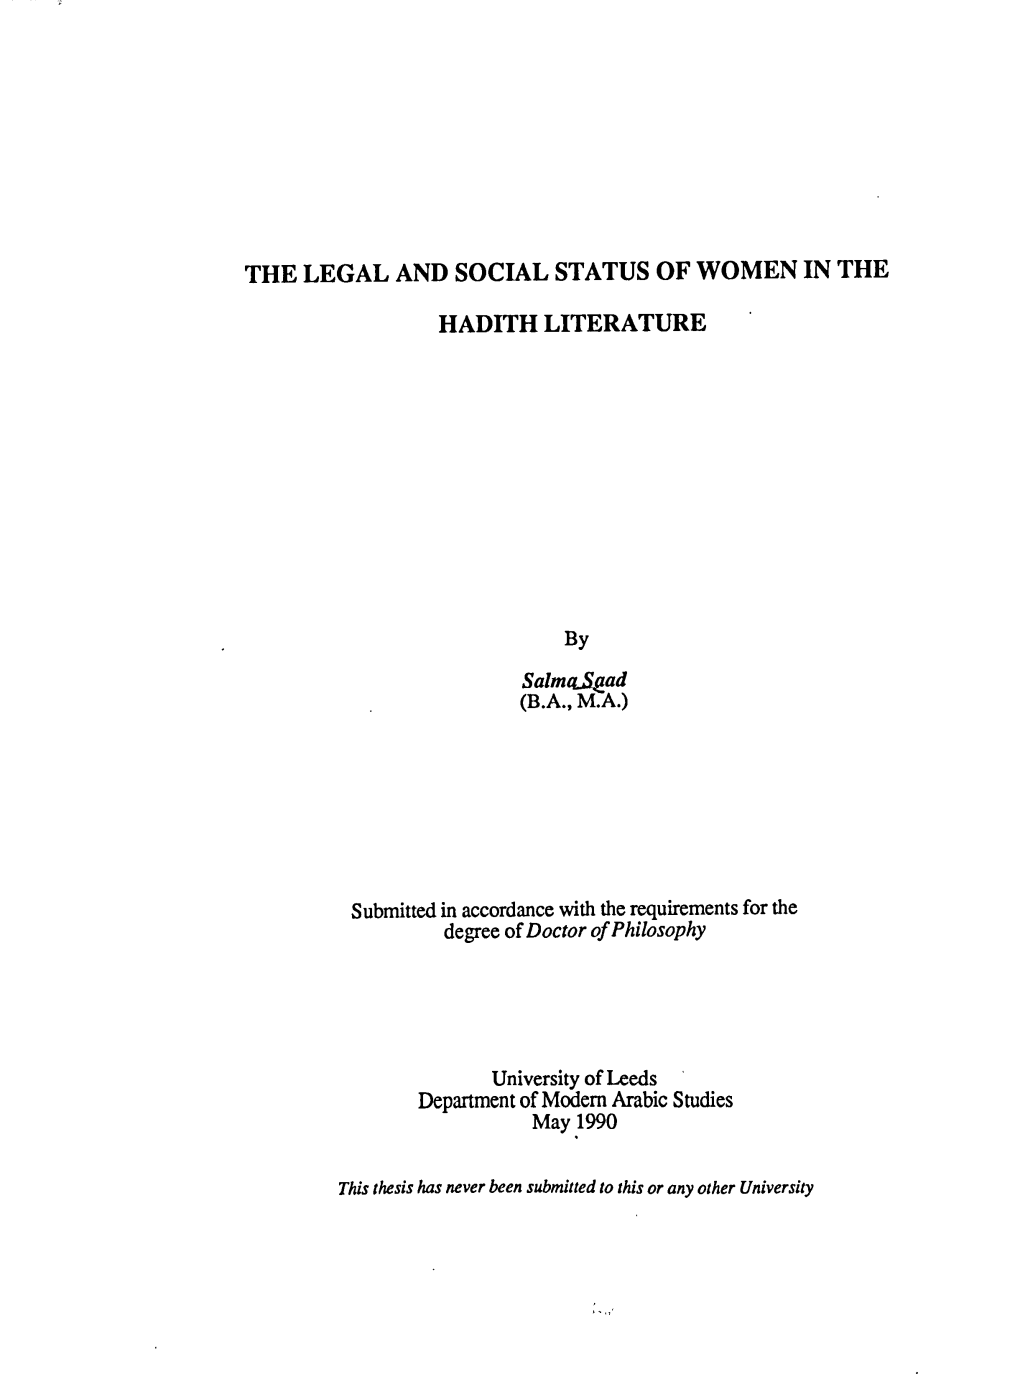 The Legal and Social Status of Women in the Hadith Literature